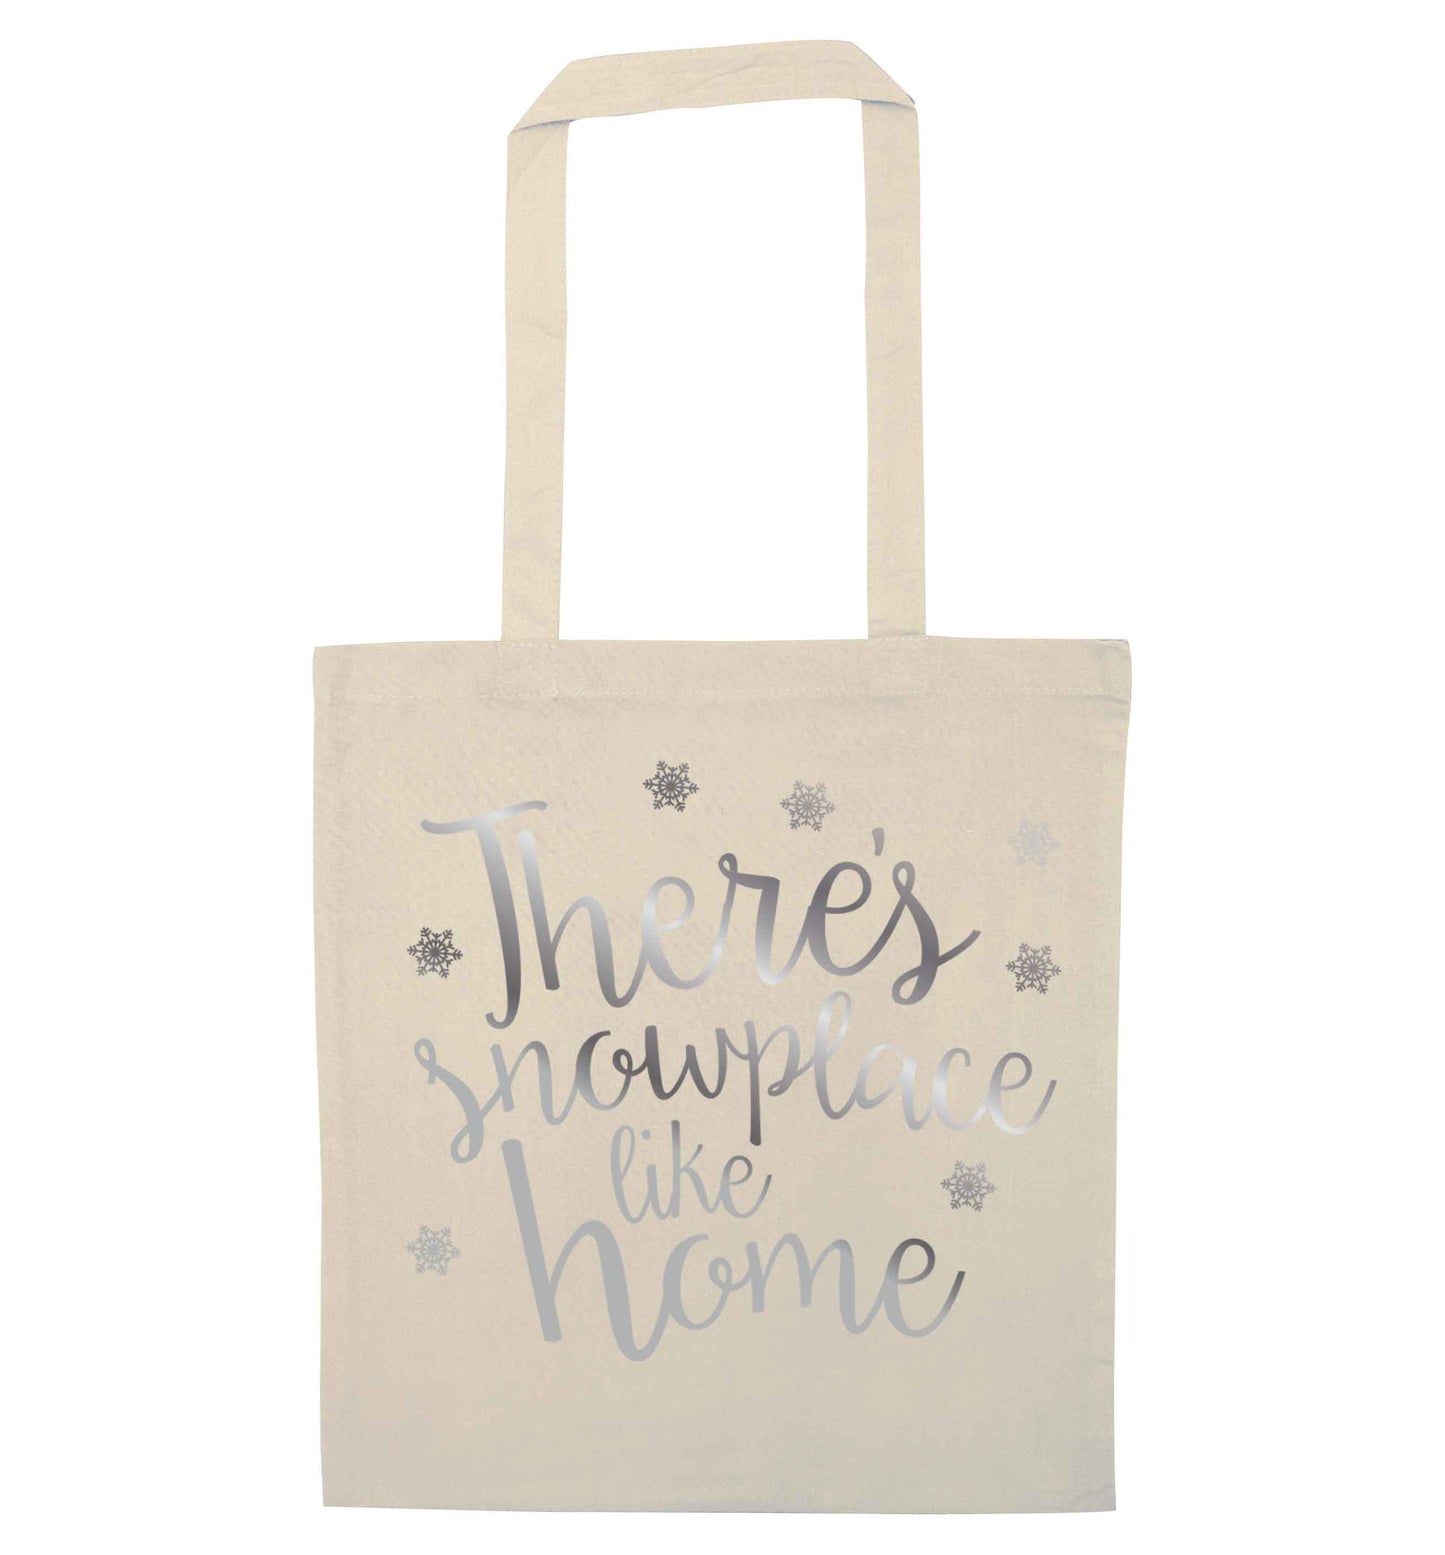 There's snowplace like home - metallic silver natural tote bag